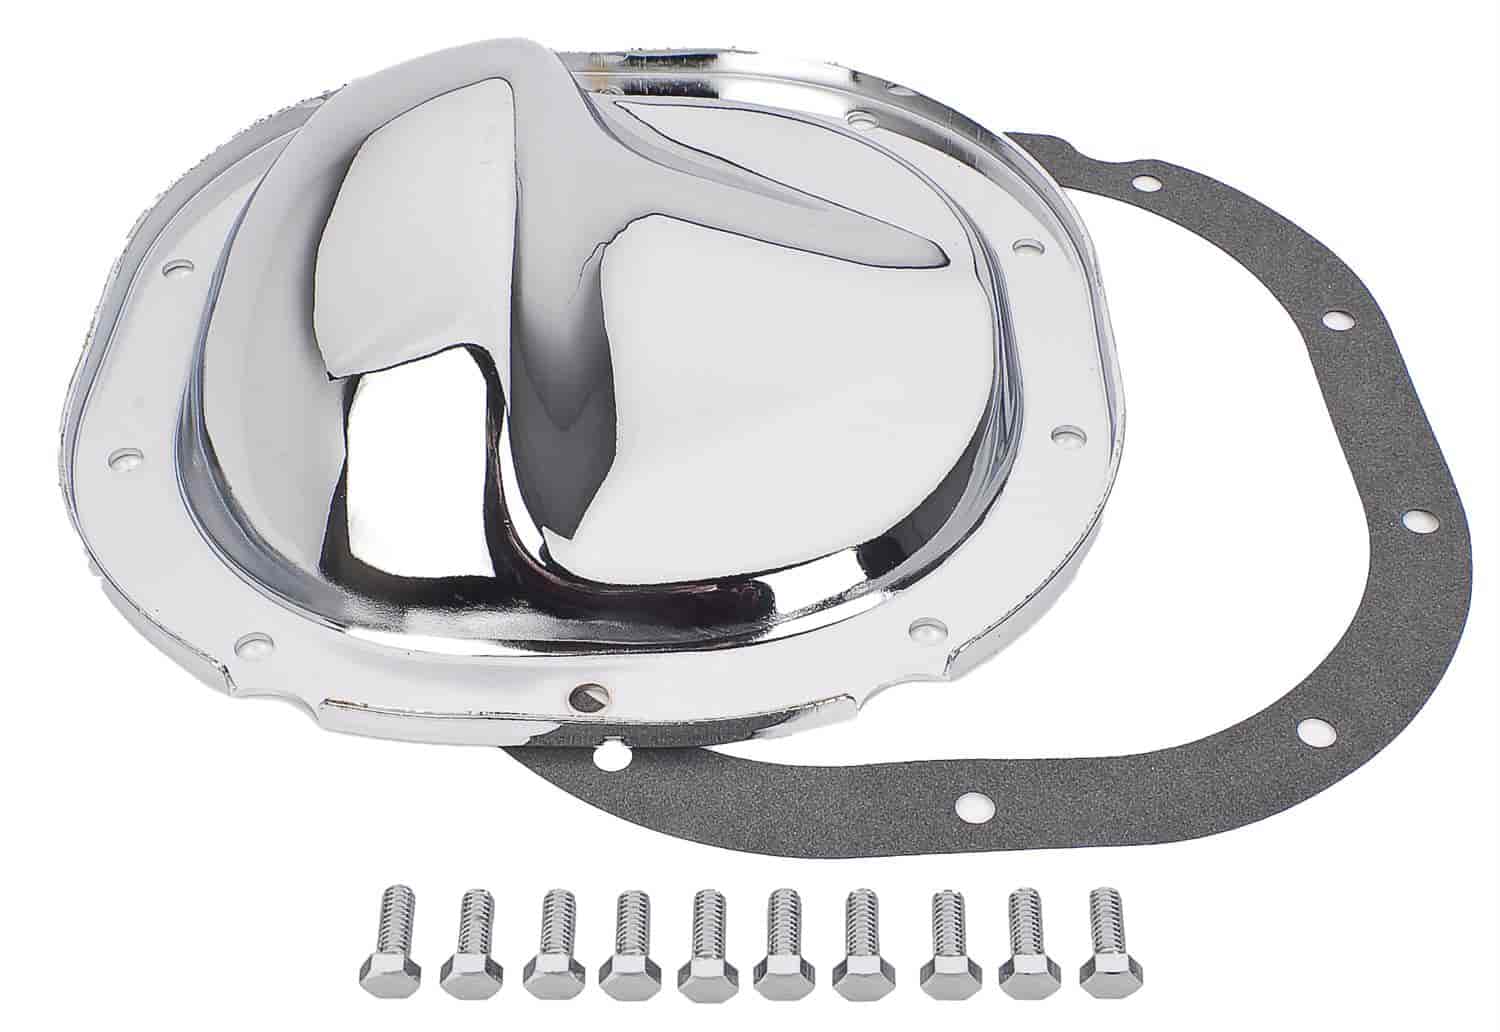 Chrome Differential Cover Ford 8.8 in. 10-Bolt [1981-2013 Except IRS]